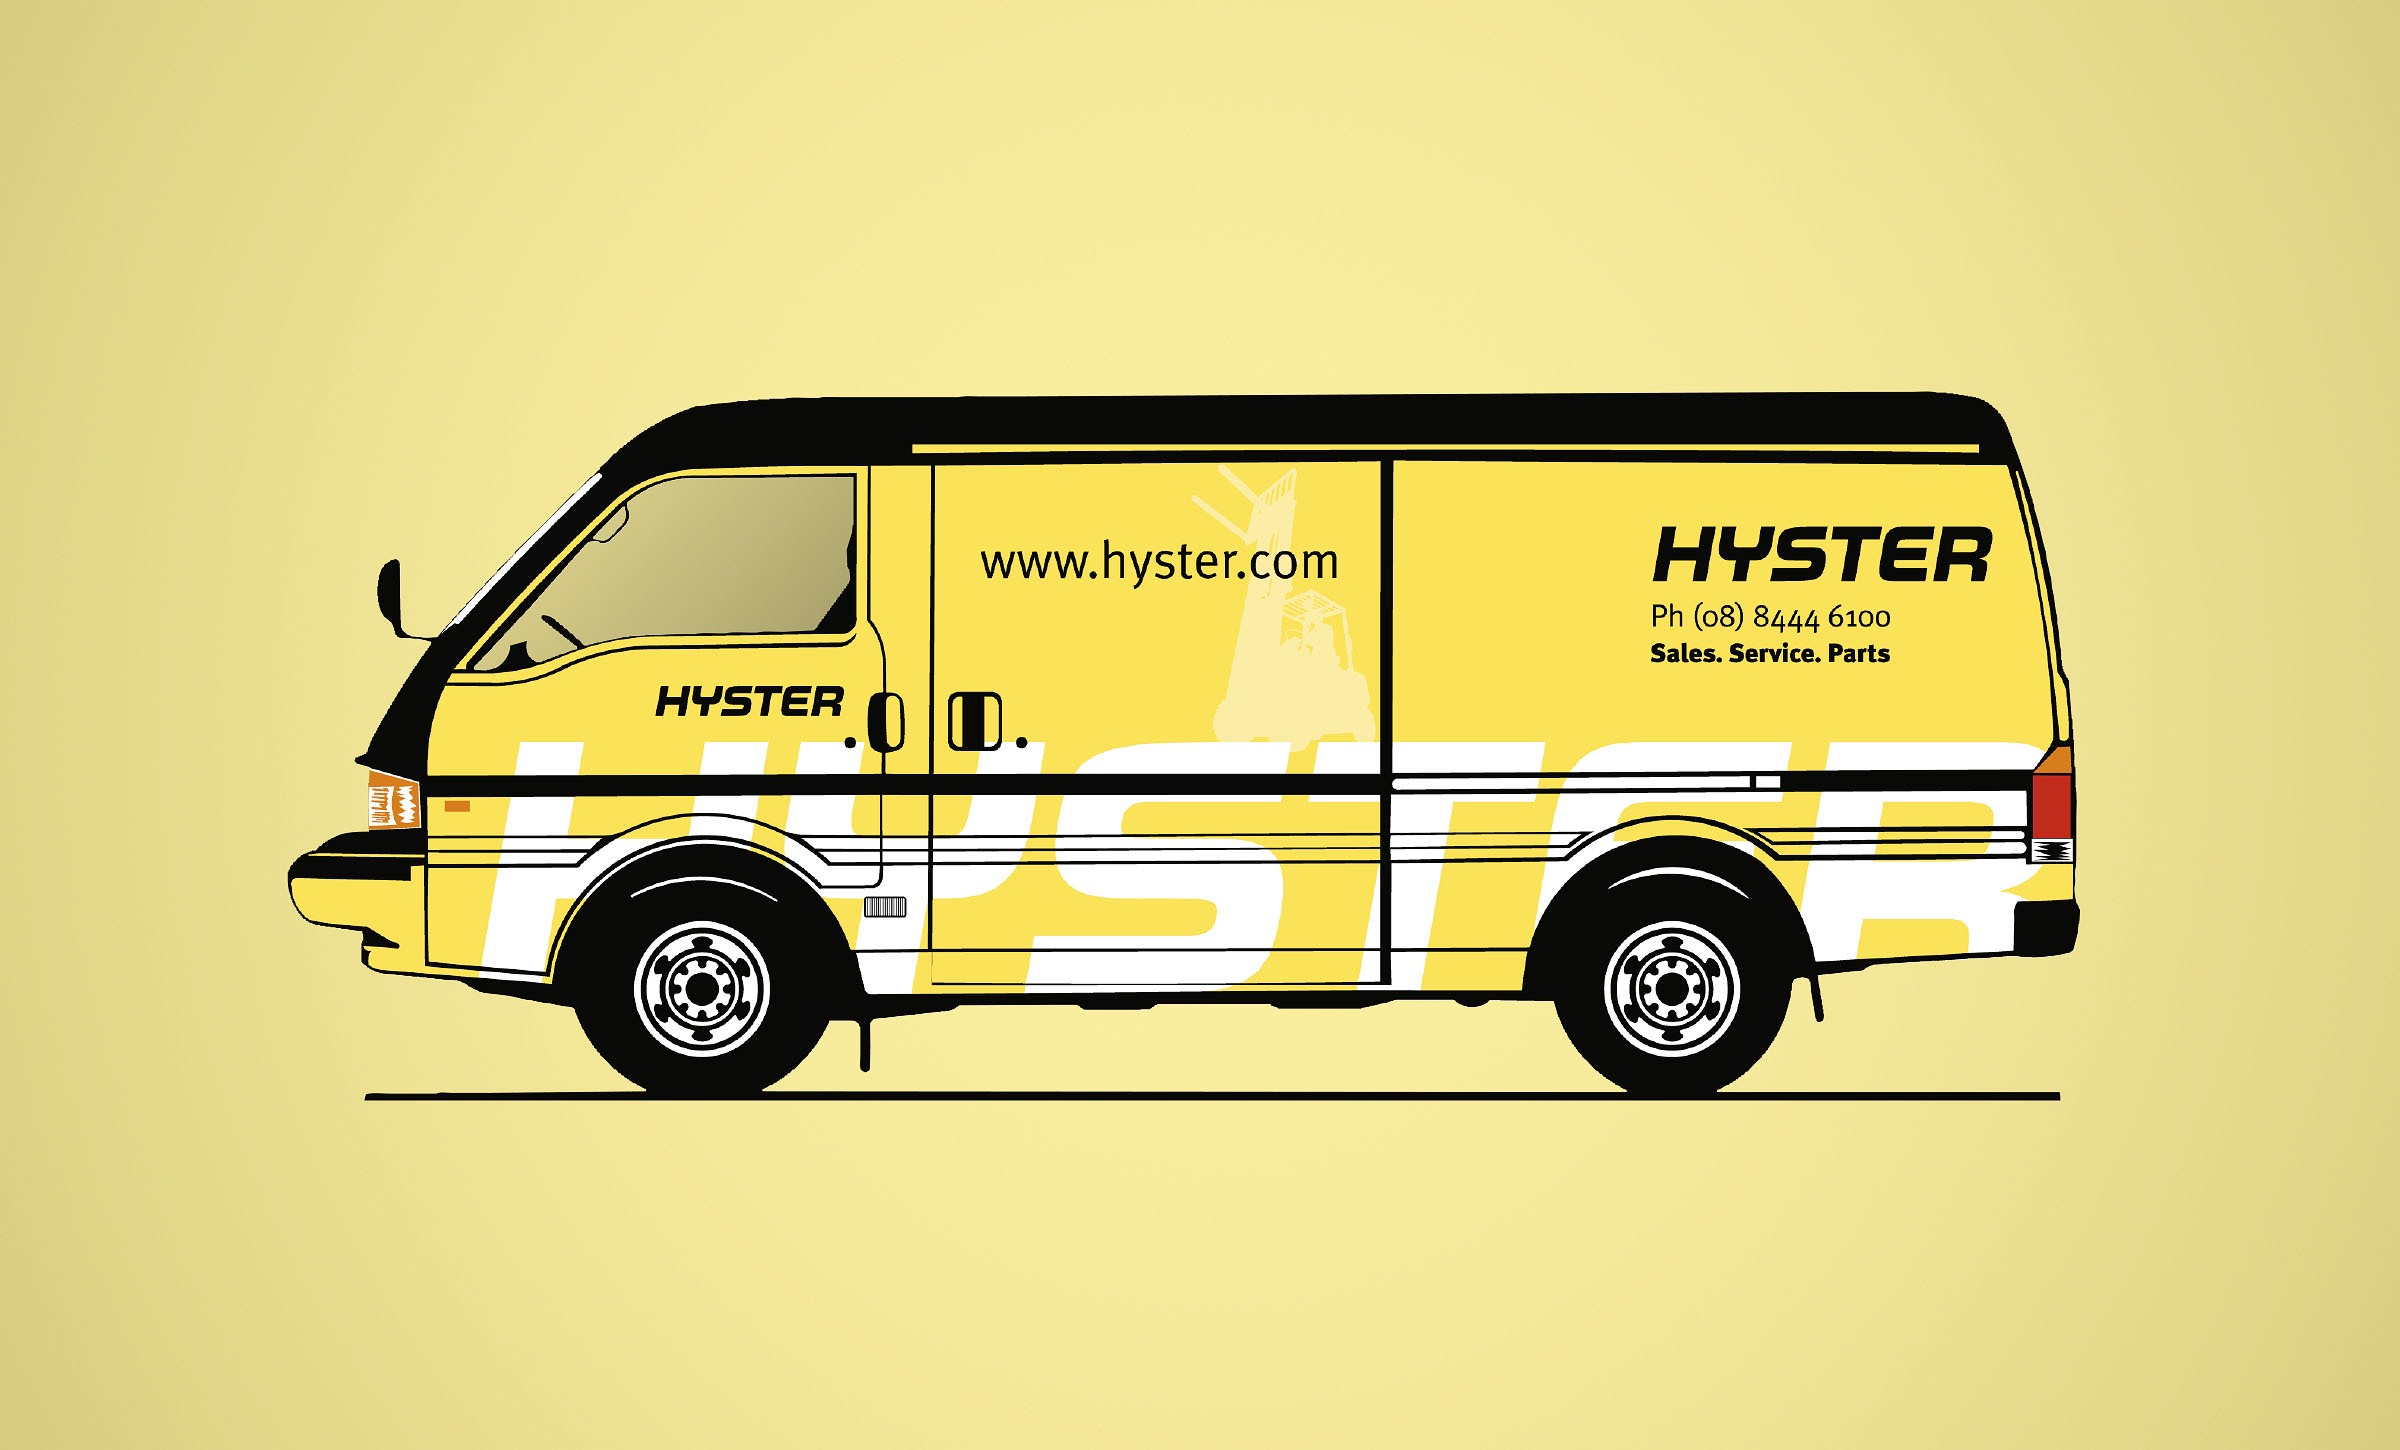 NRG Digital - Hyster Corporate Branding and Advertising Campaign